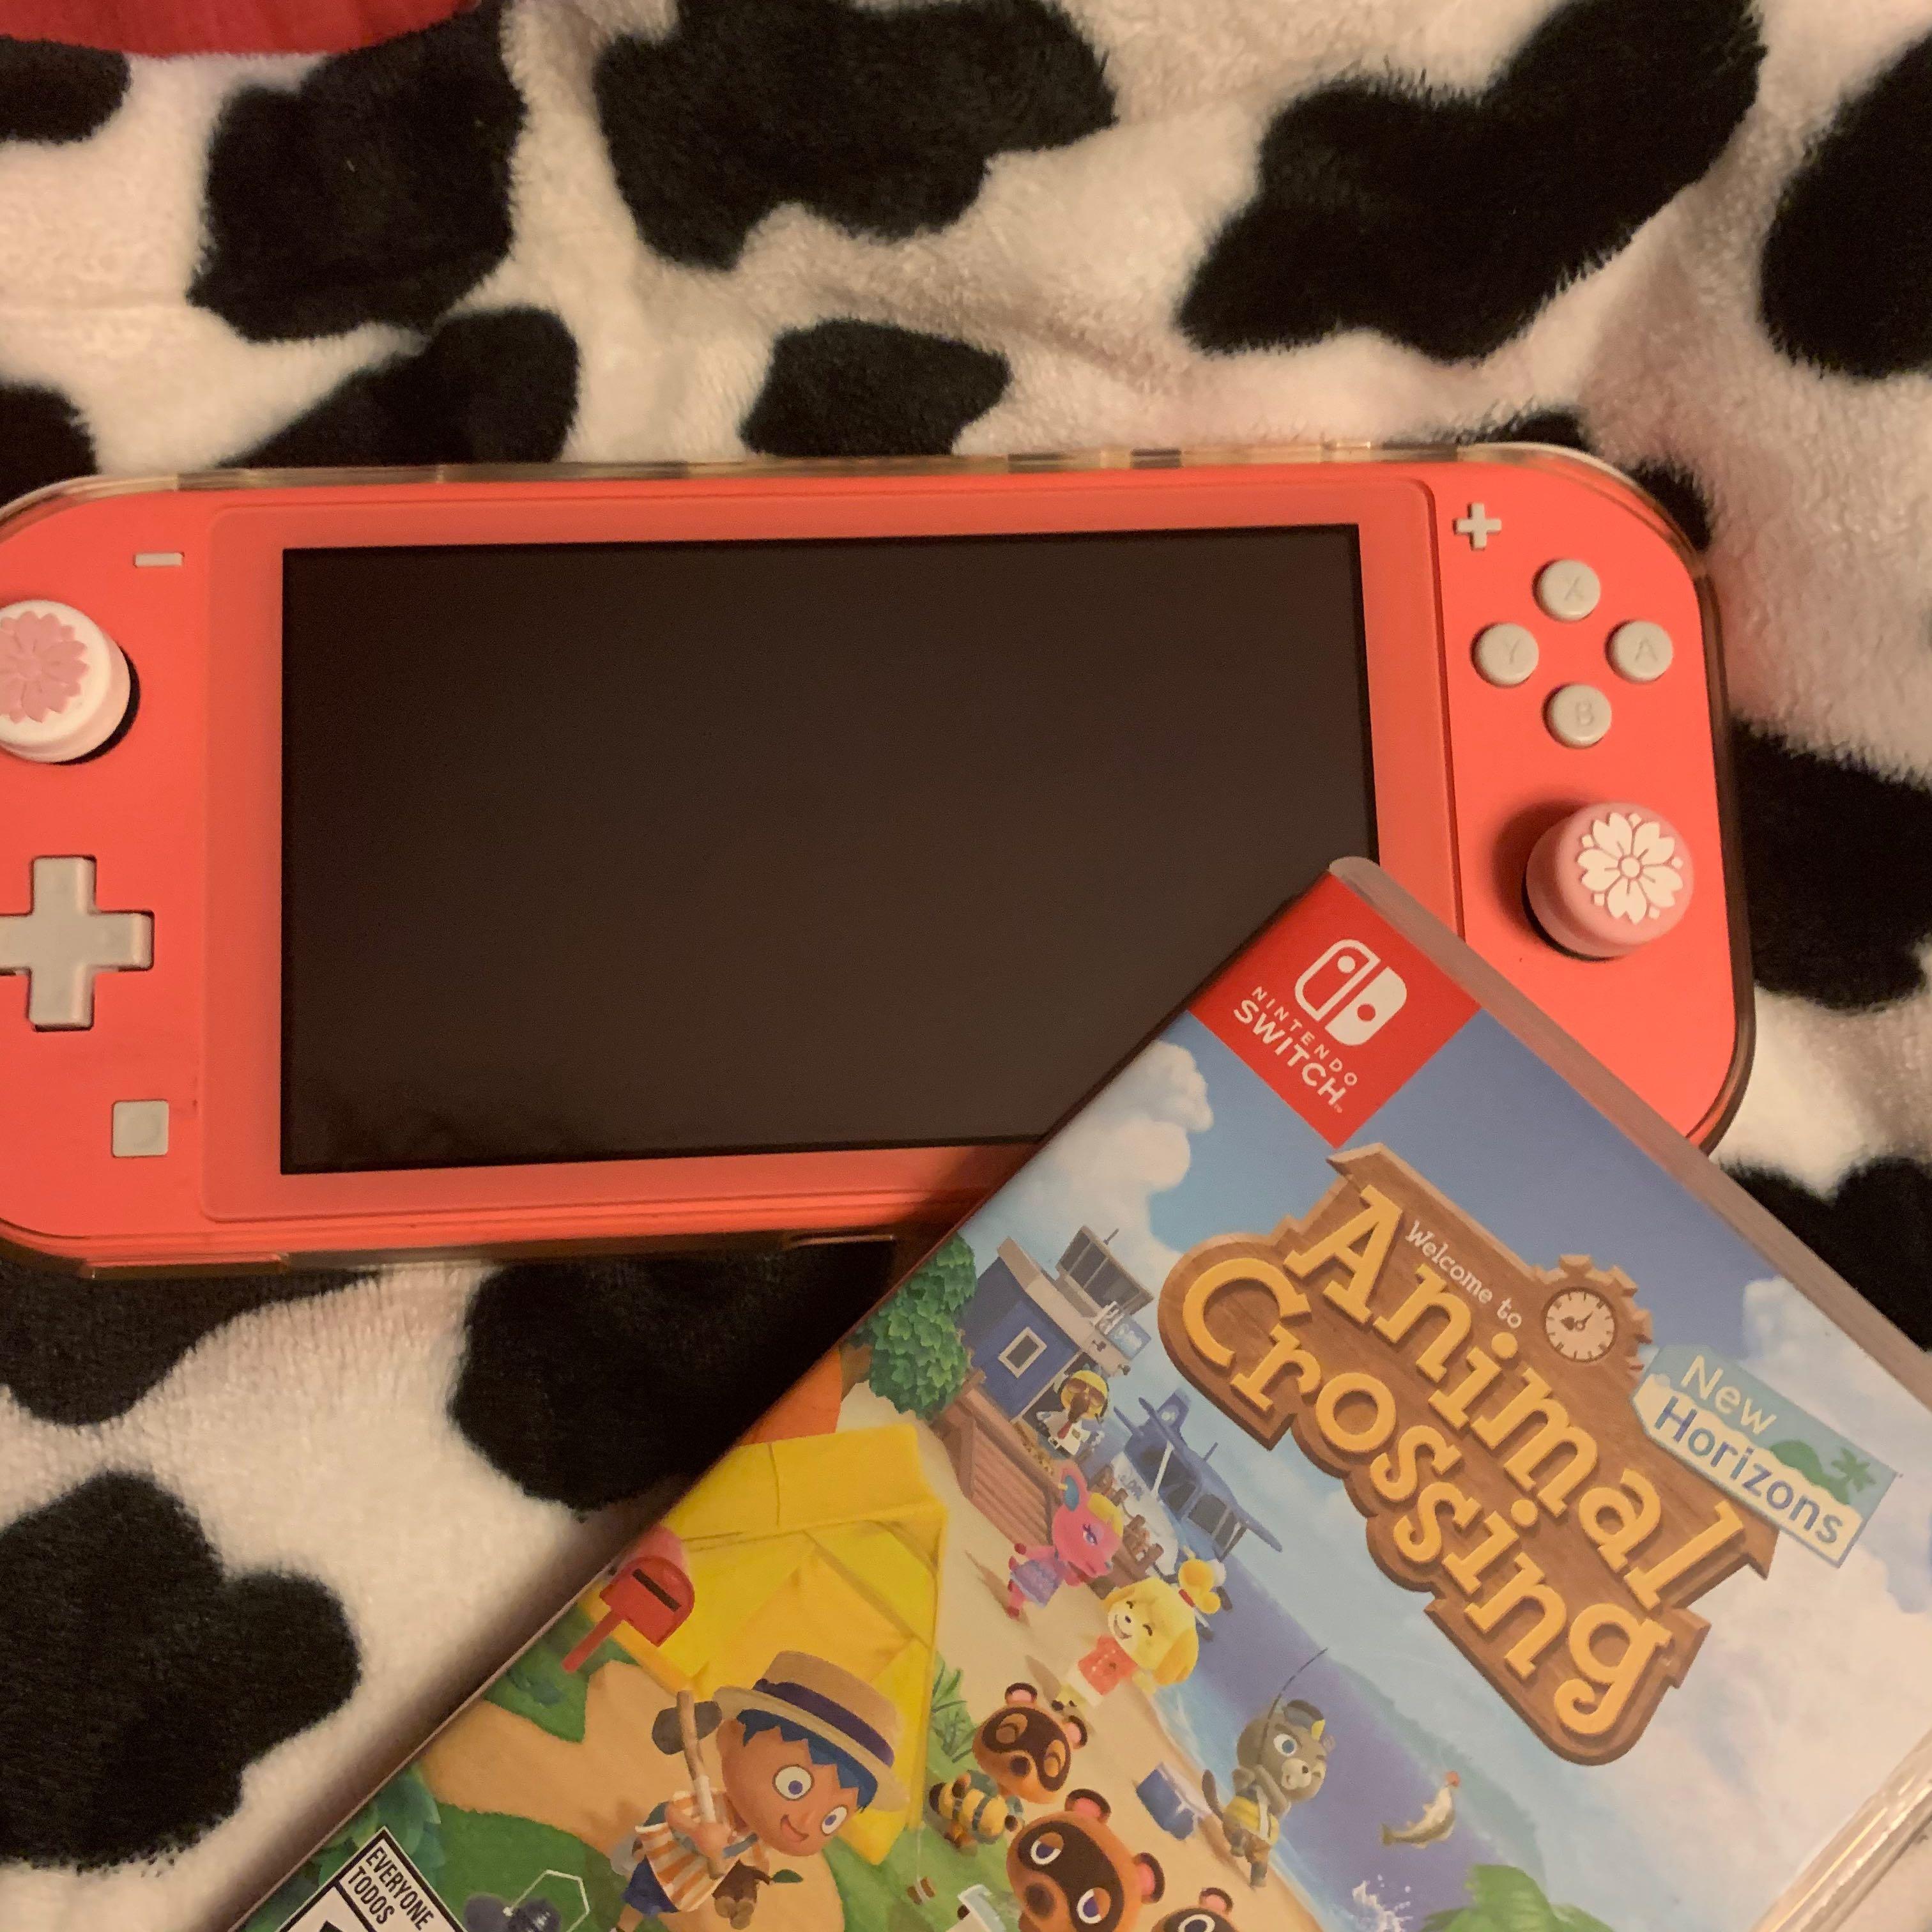 Nintendo Switch Lite Console, Coral - Animal Crossing: New